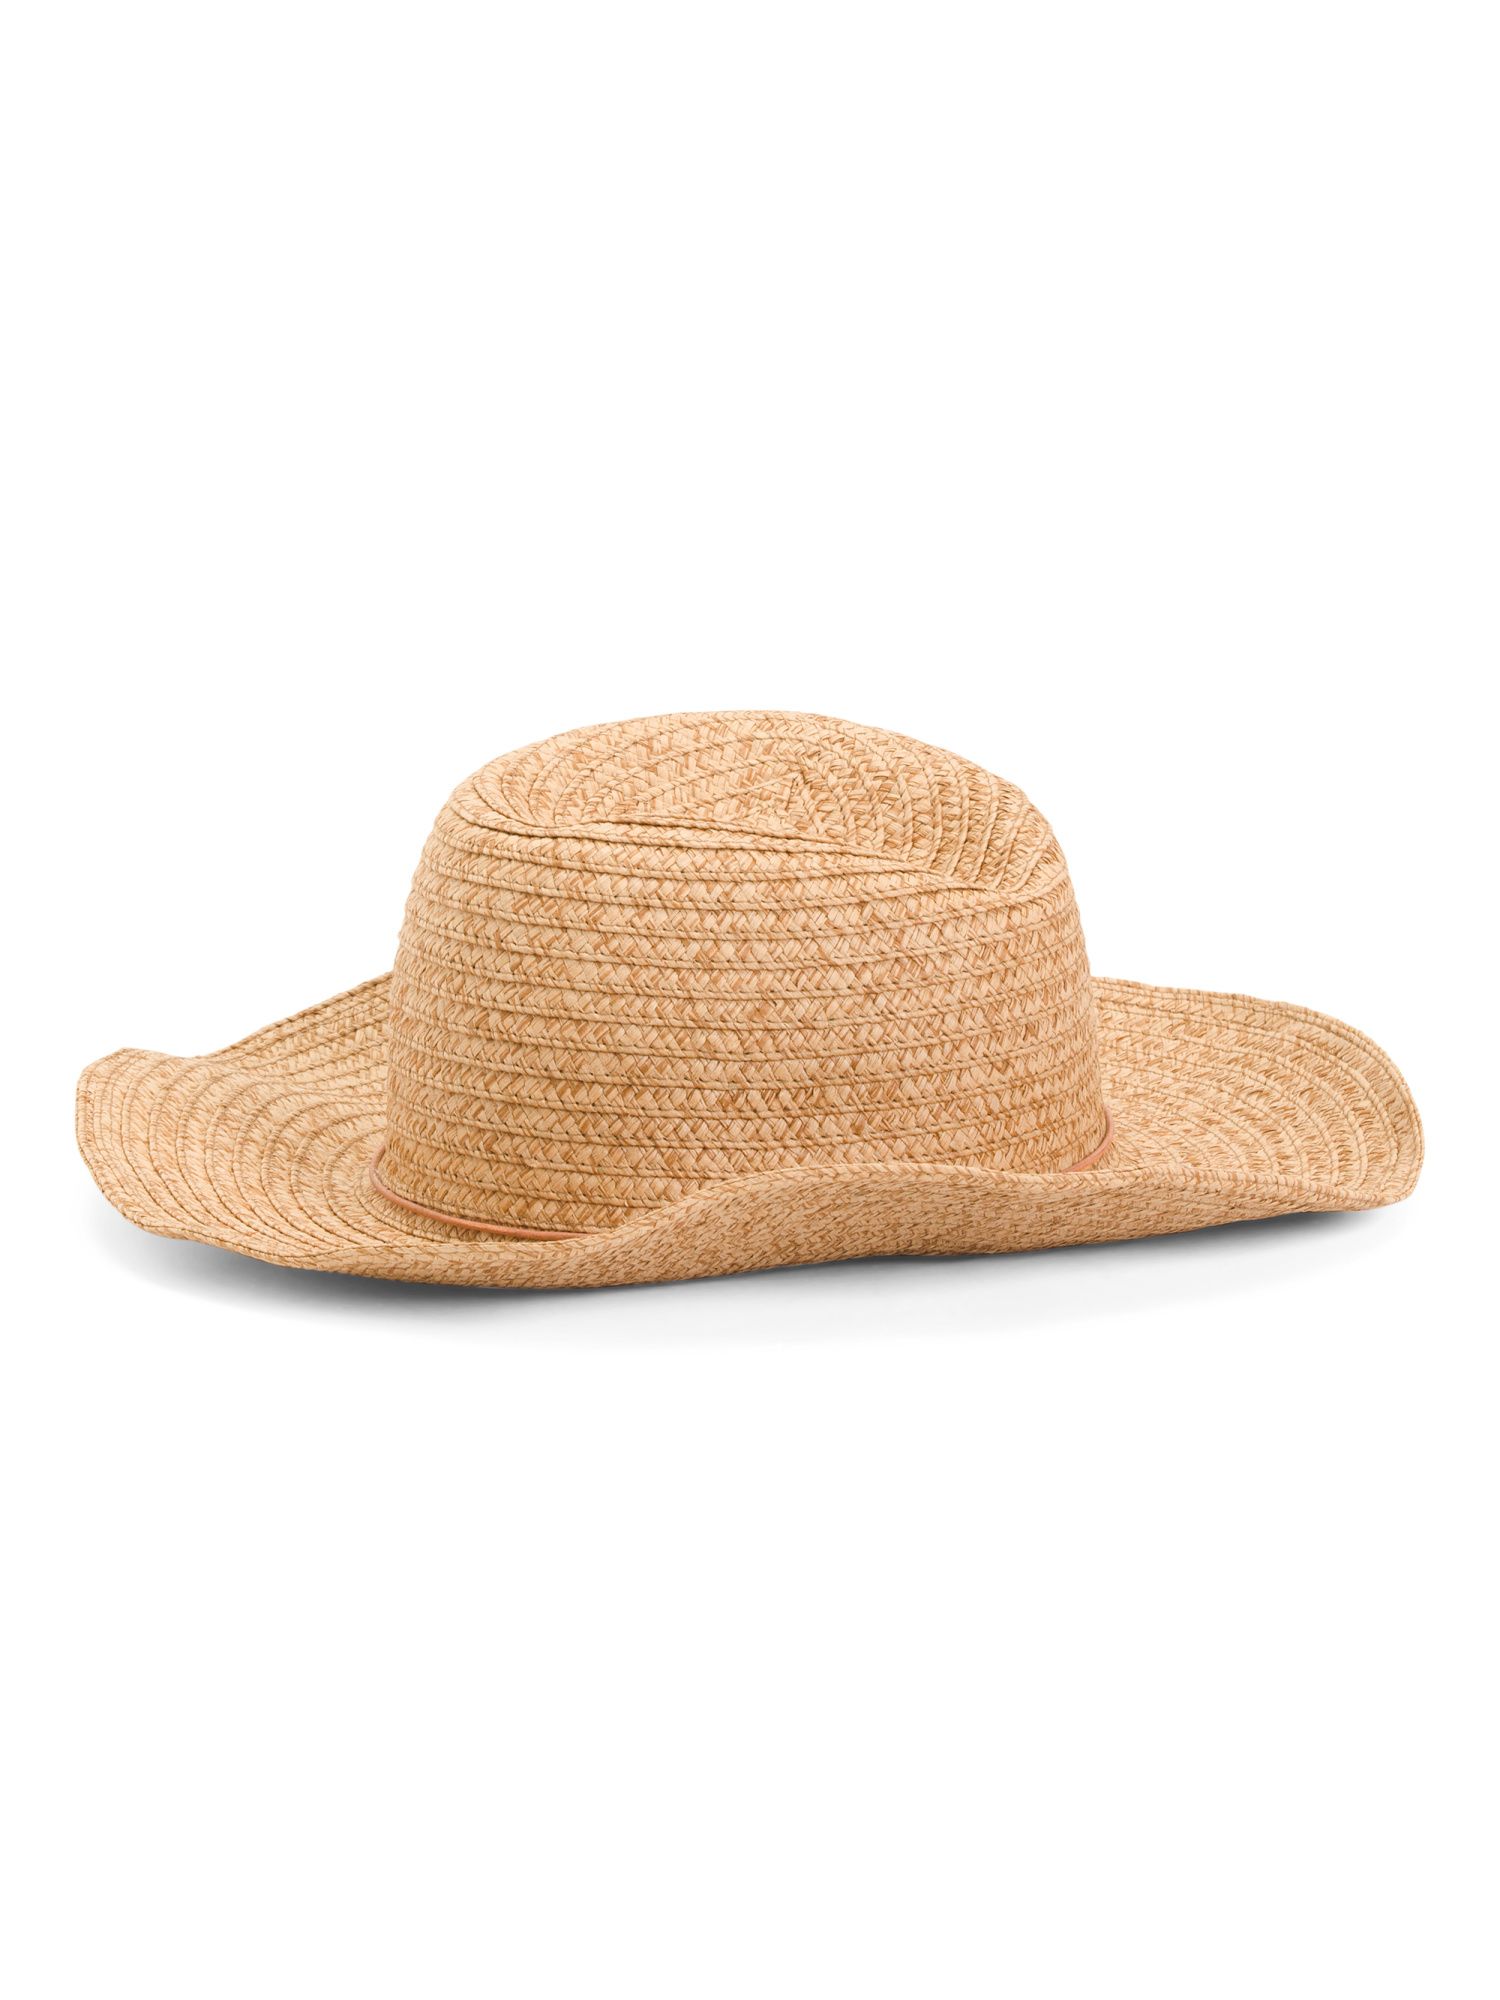 Weed Straw Rancher Hat With Cord Stone Trim | TJ Maxx